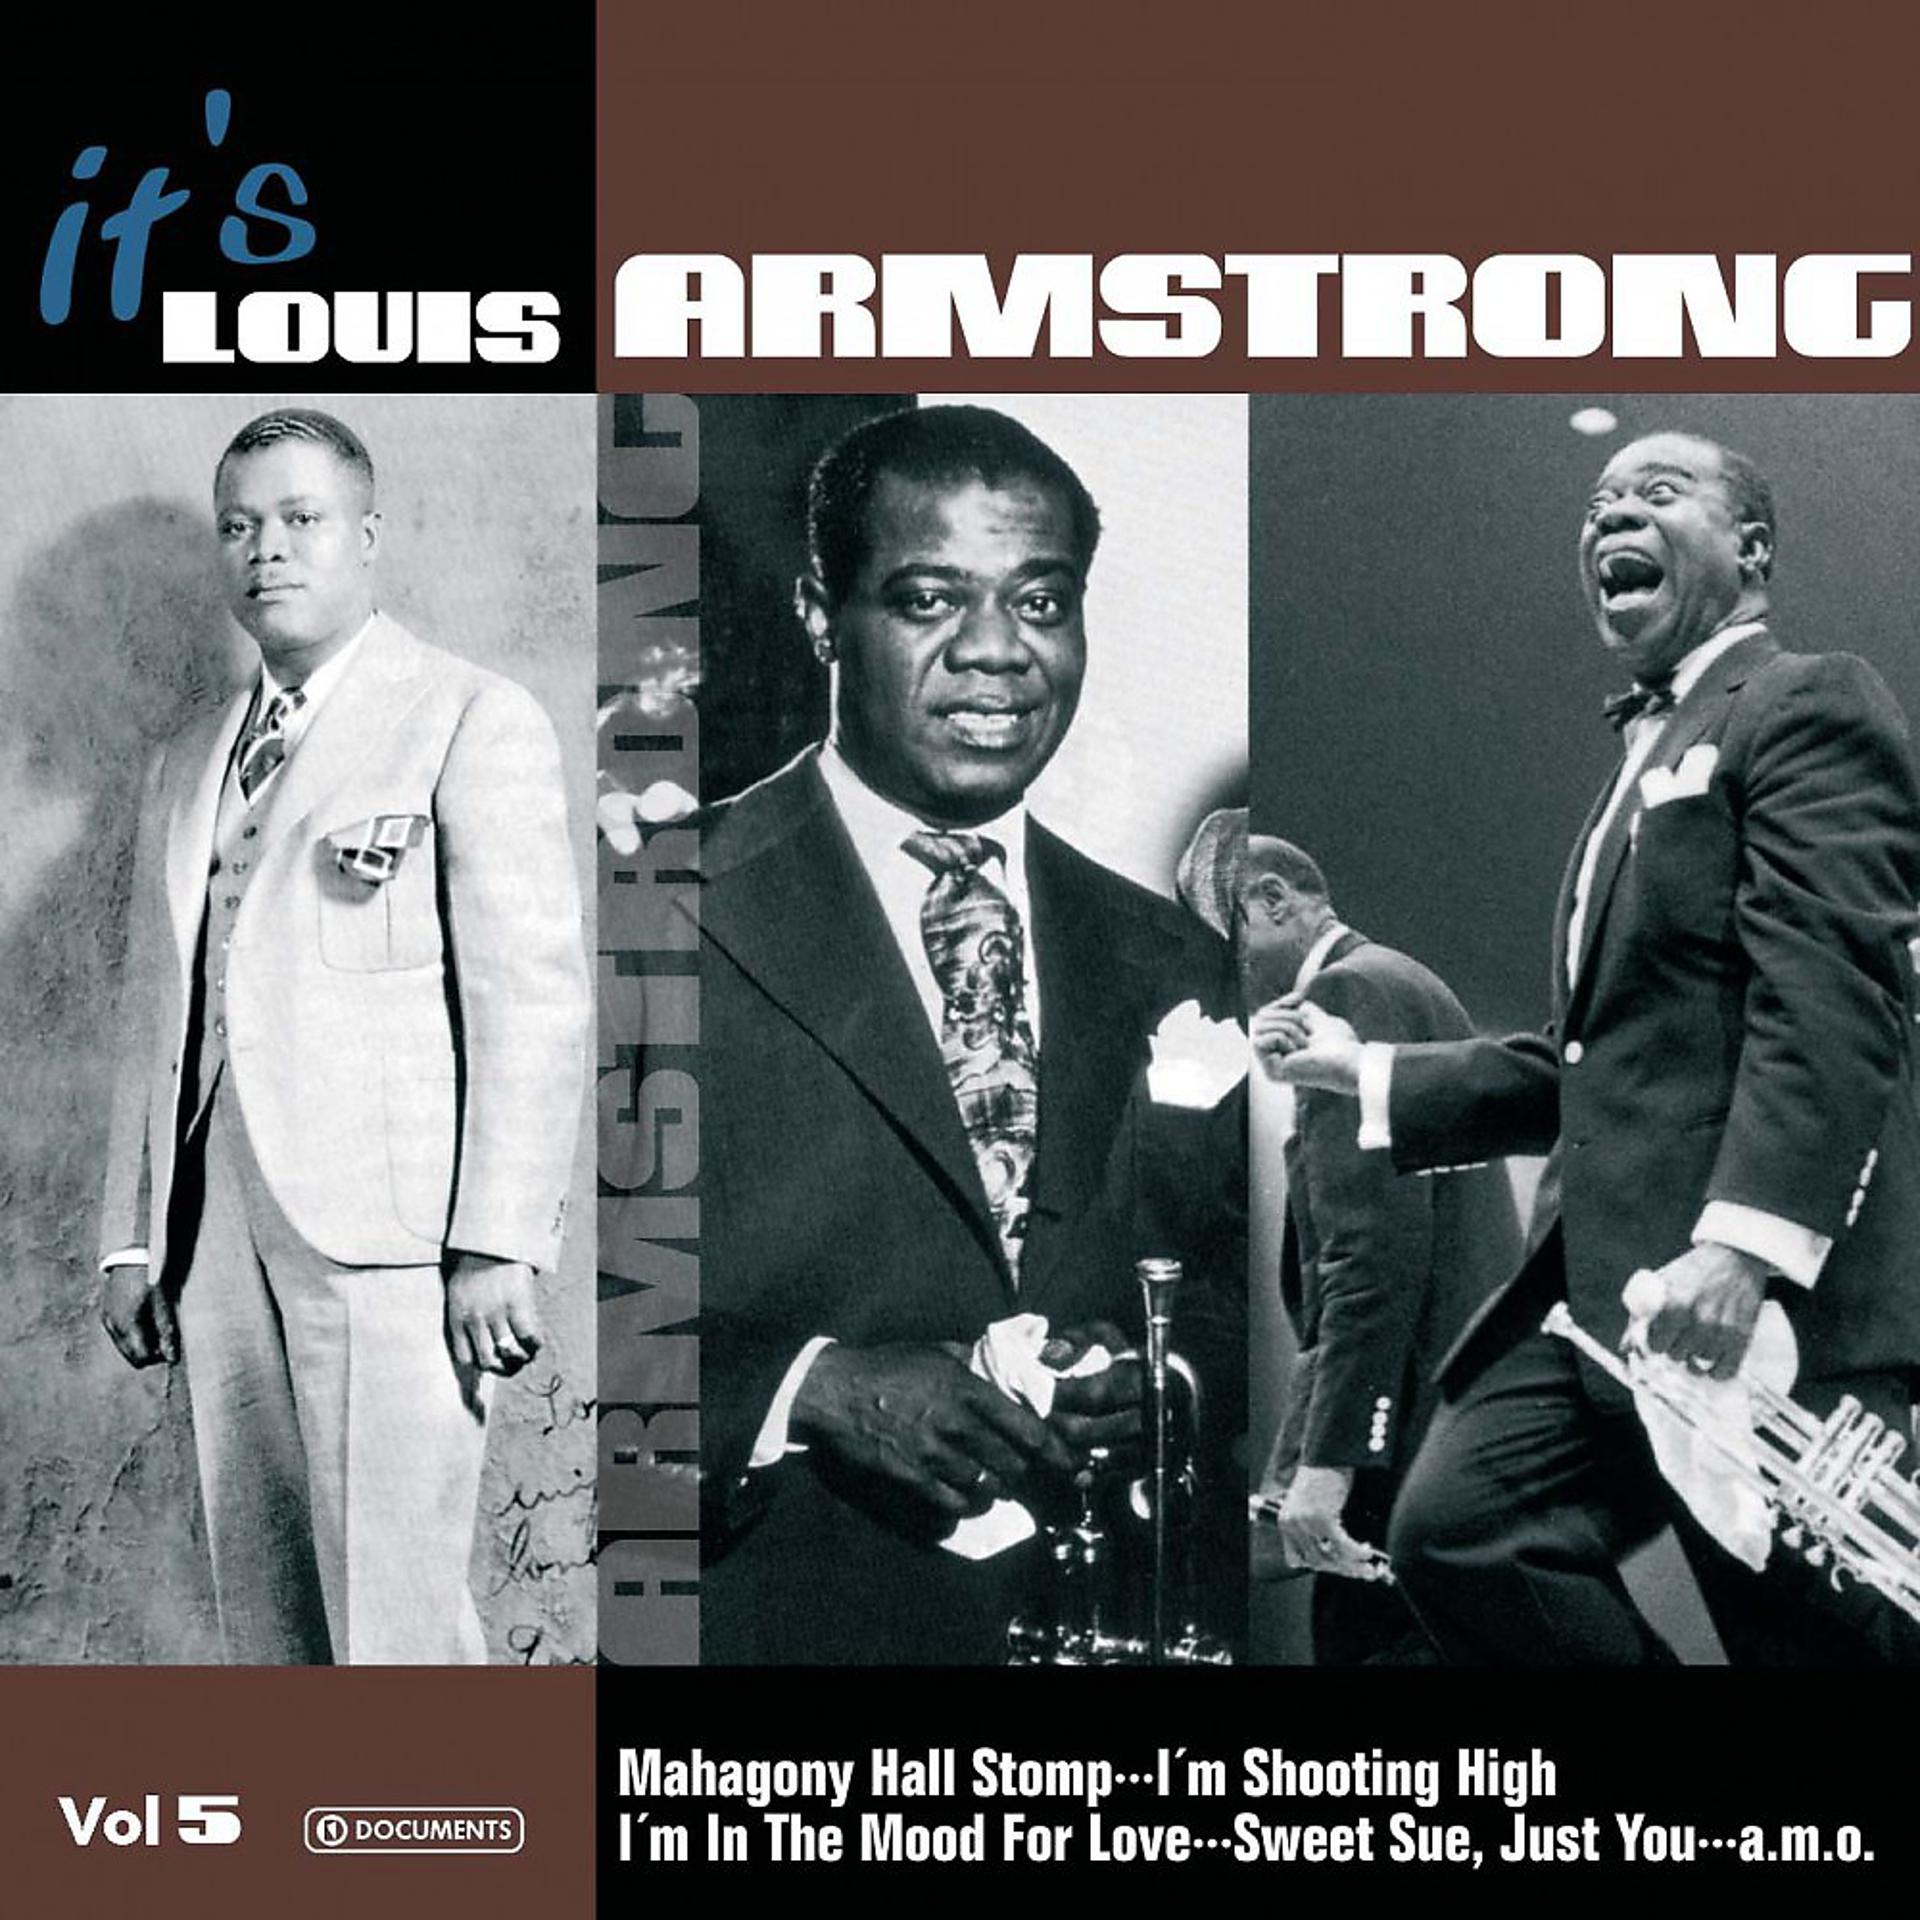 Постер альбома Louis Armstrong - It's Louis Armstrong Vol. 5